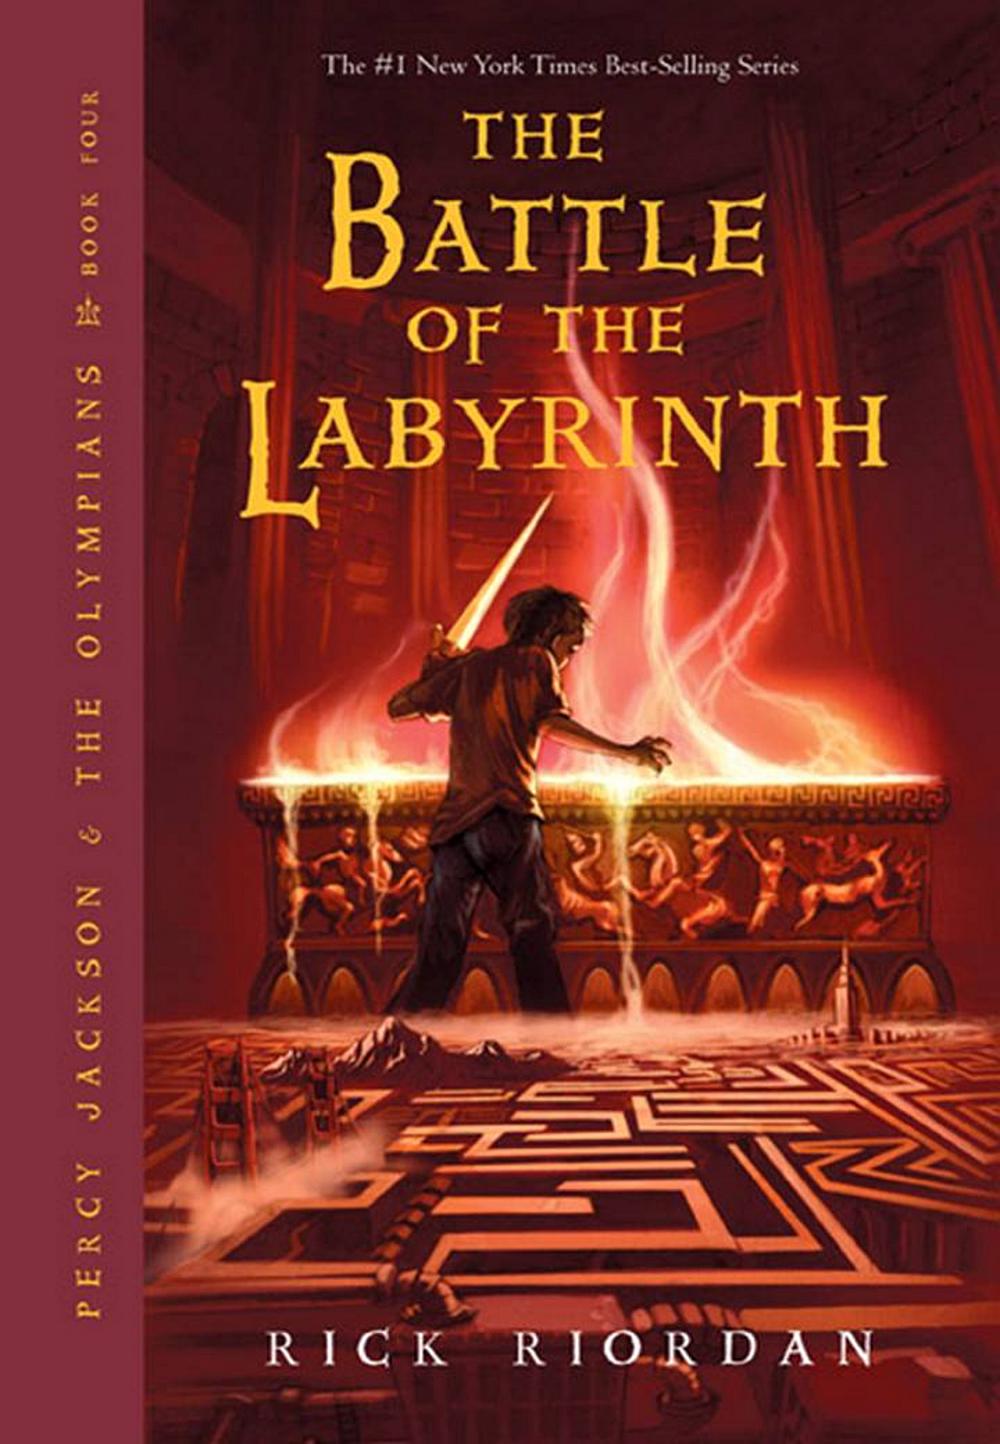 The Battle Of The Labyrinth Movie The Audiophile : Riordan Retrospective: The Battle of the Labyrinth